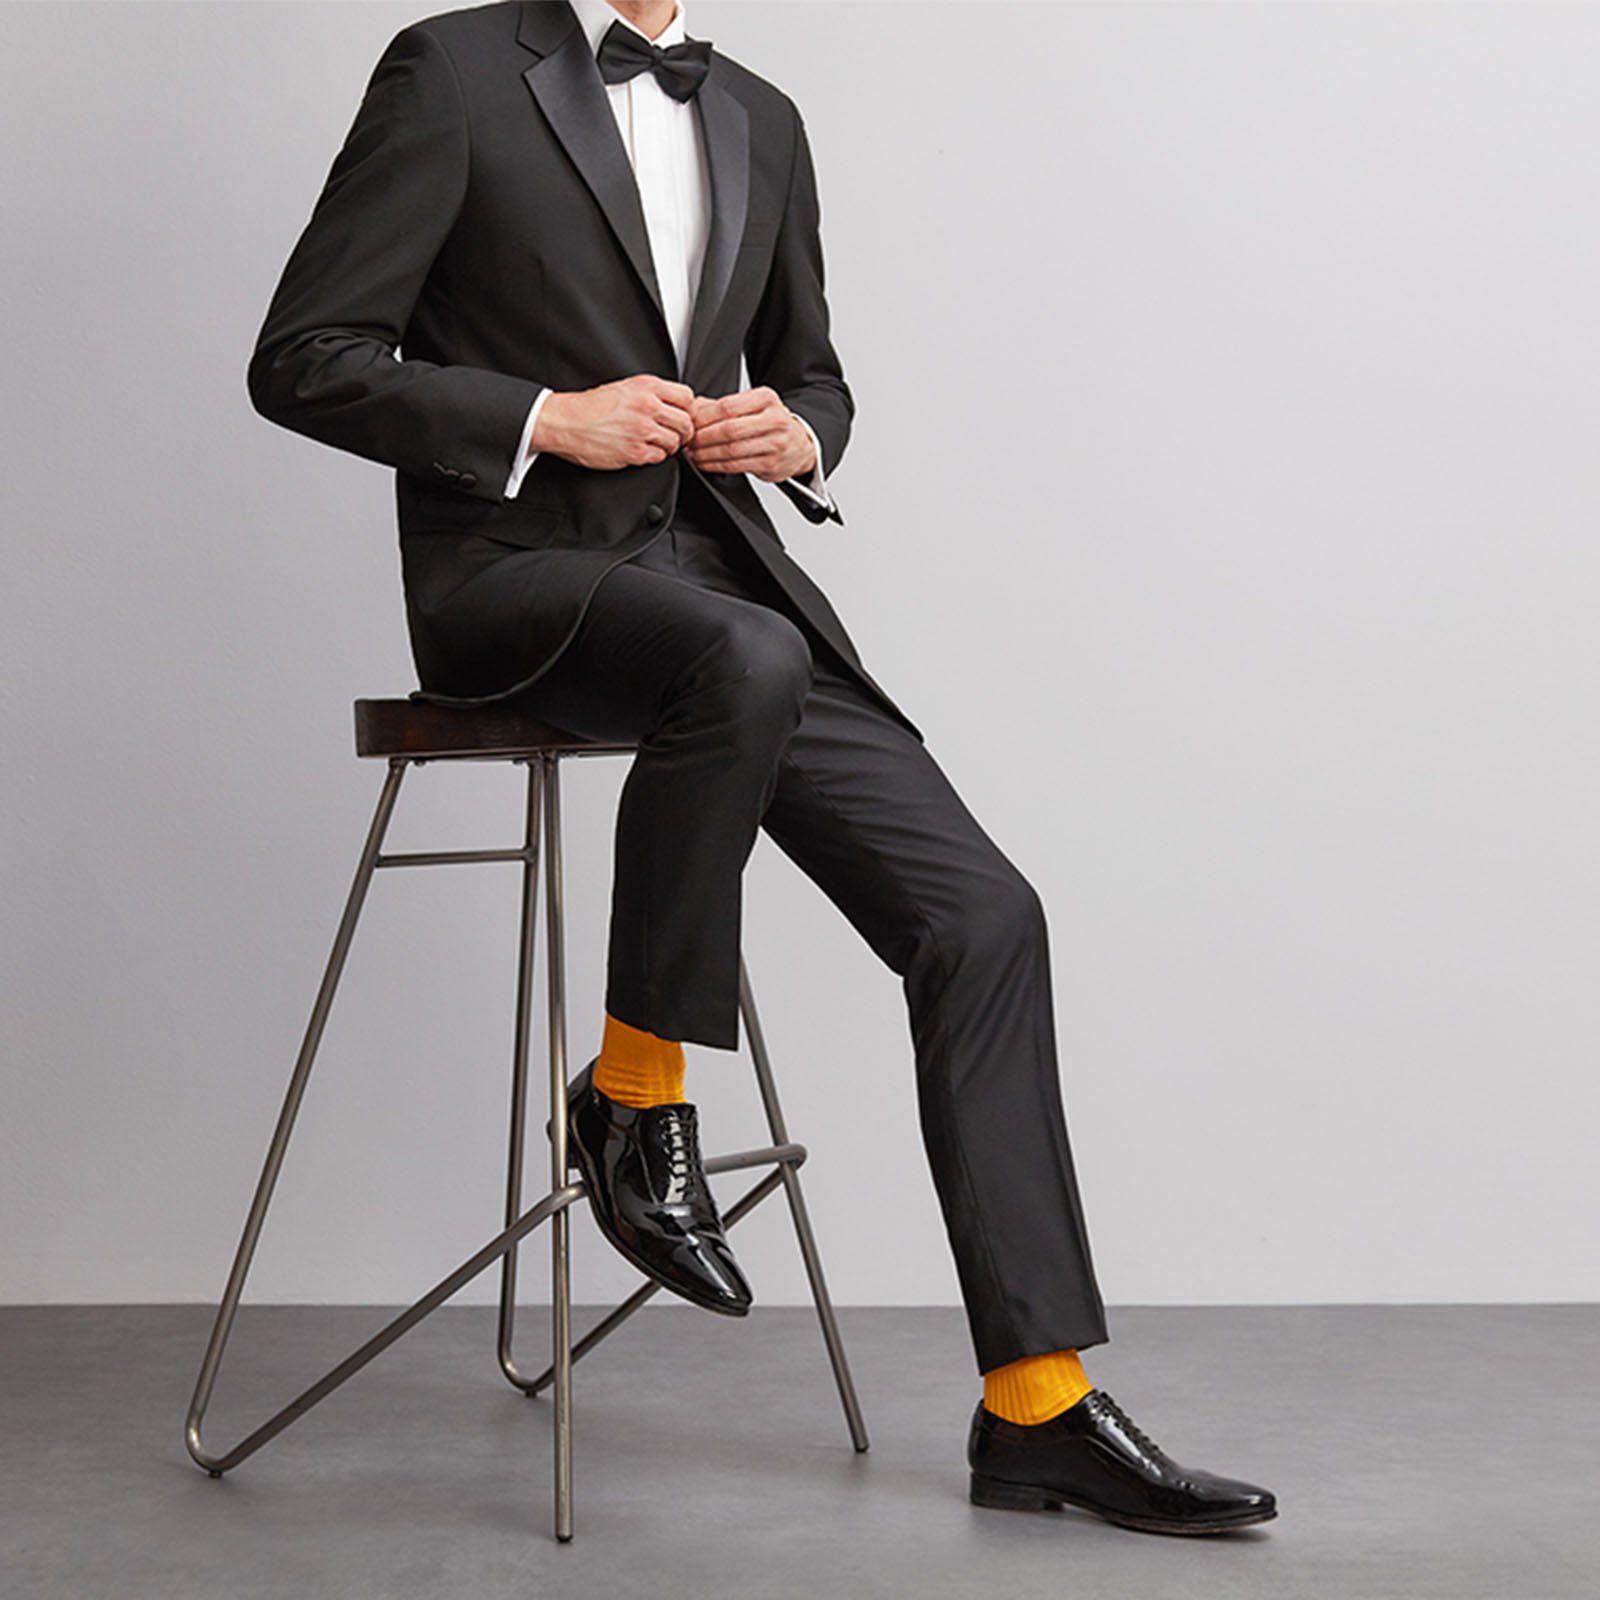 Man sitting on a stool wearing a tuxedo, bow tie and saffron yellow socks from London Sock Company.